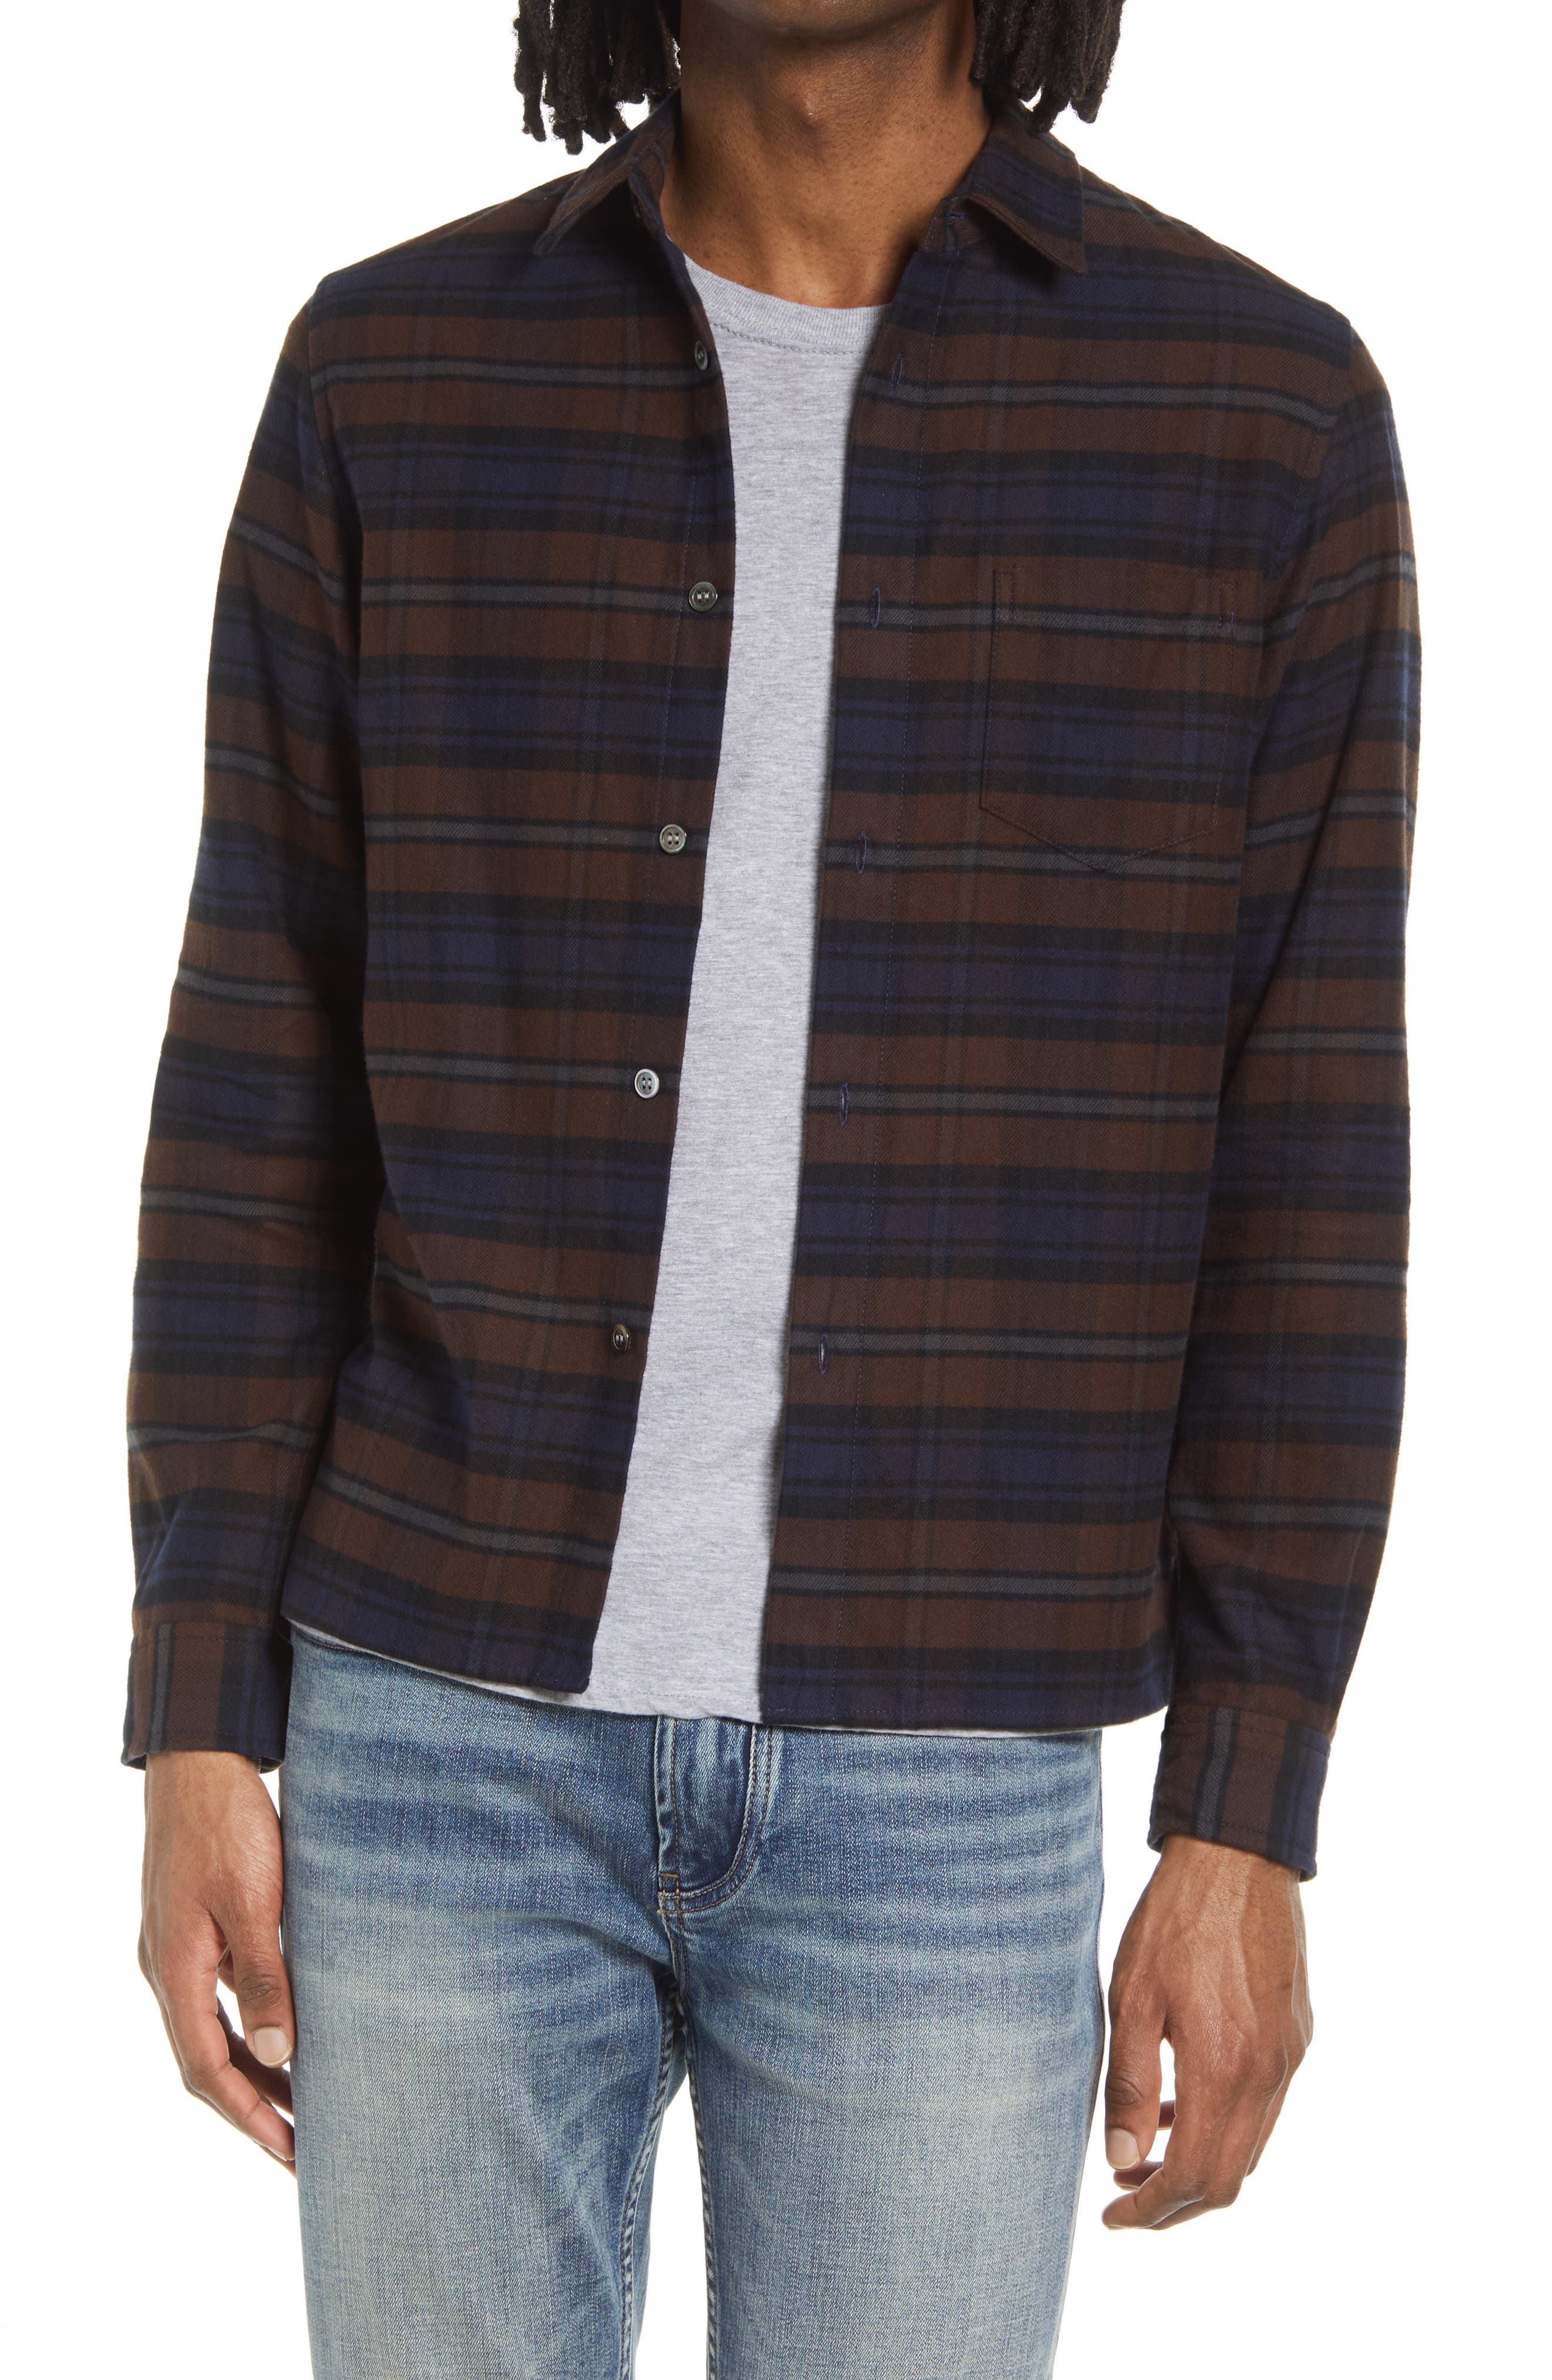 John Elliott Sly Plaid Cotton Button-Up Shirt in Ridgeway Check at Nordstrom, Size Large